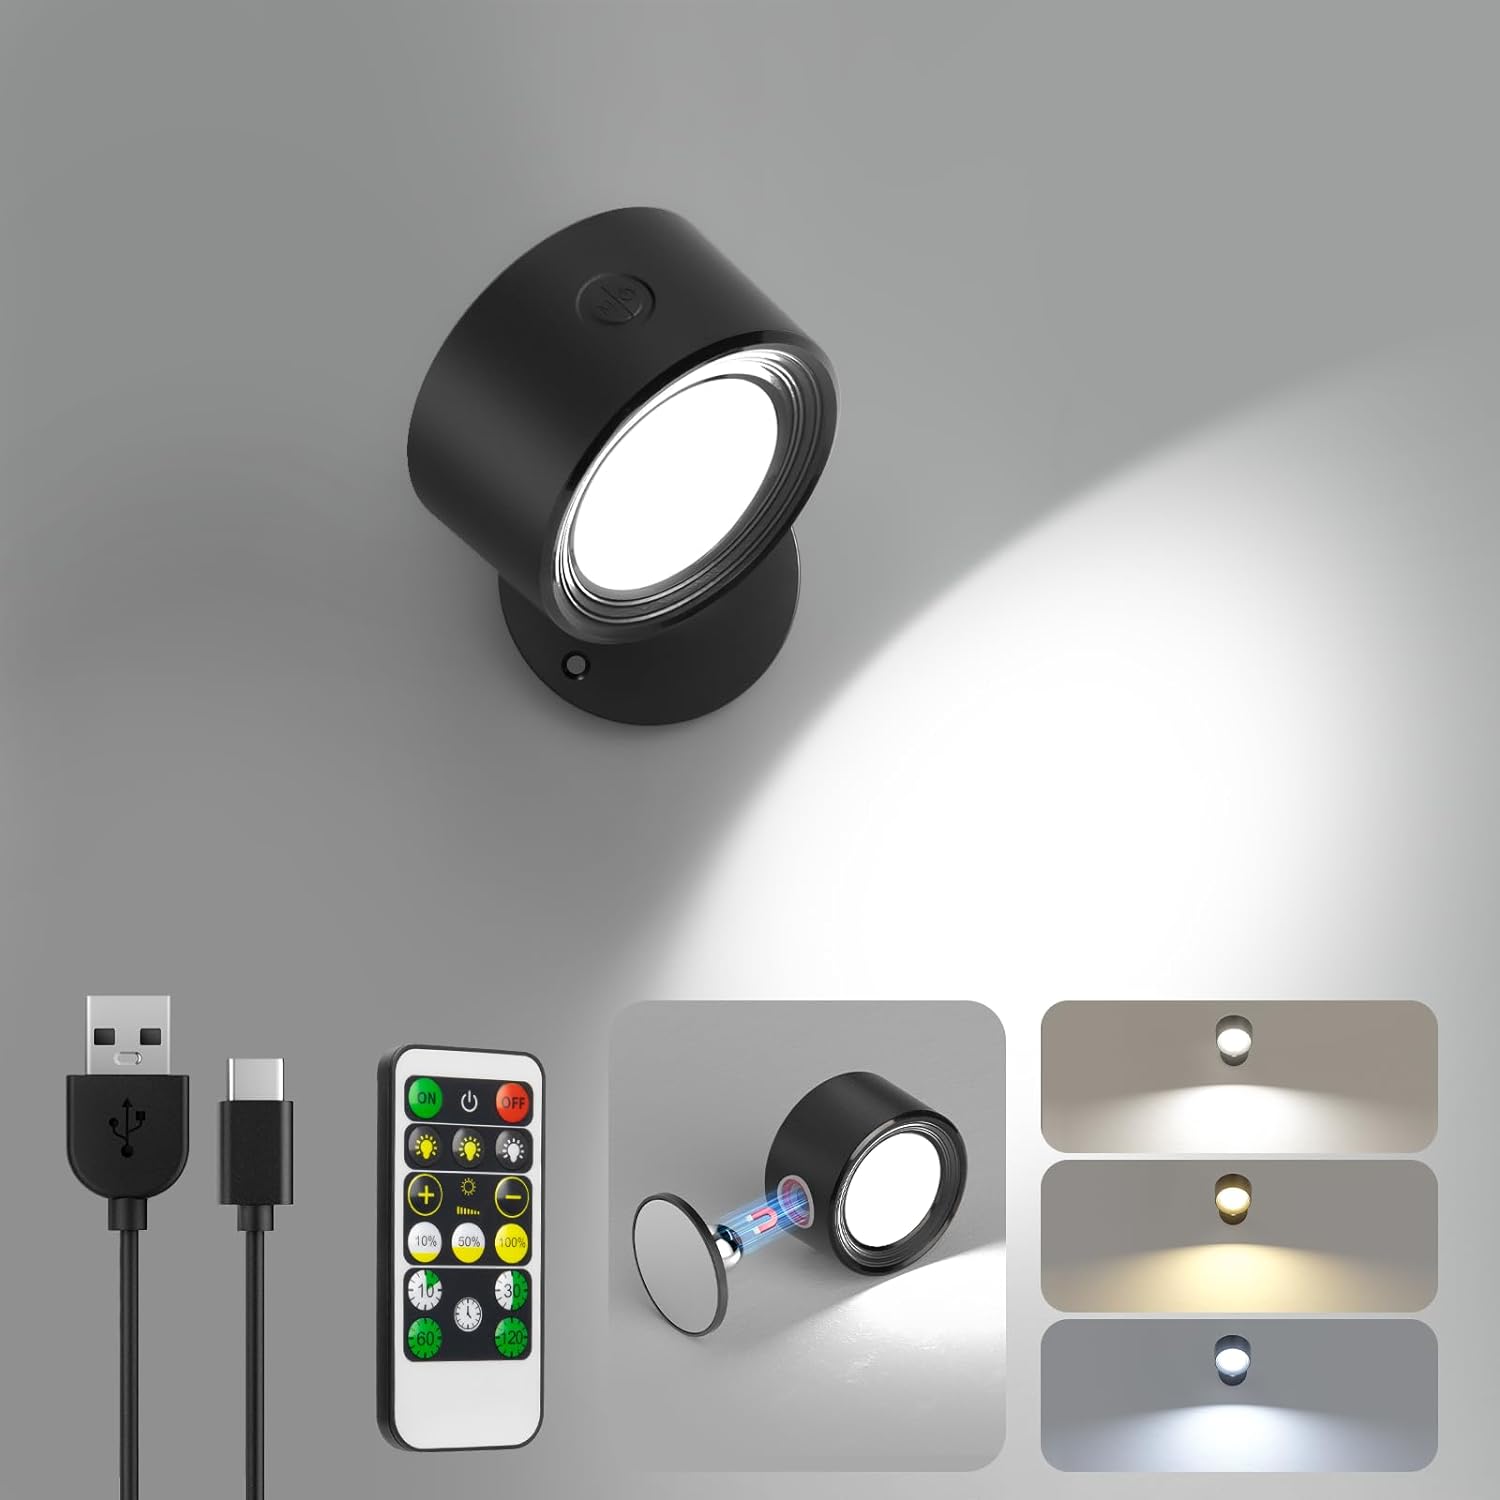 Lightbiz LED Wall Lights with Remote, Wall Mounted Sconces 3000mAh Rechargeable Battery Operated 3 Color Temperatures & Dimmable $5.59